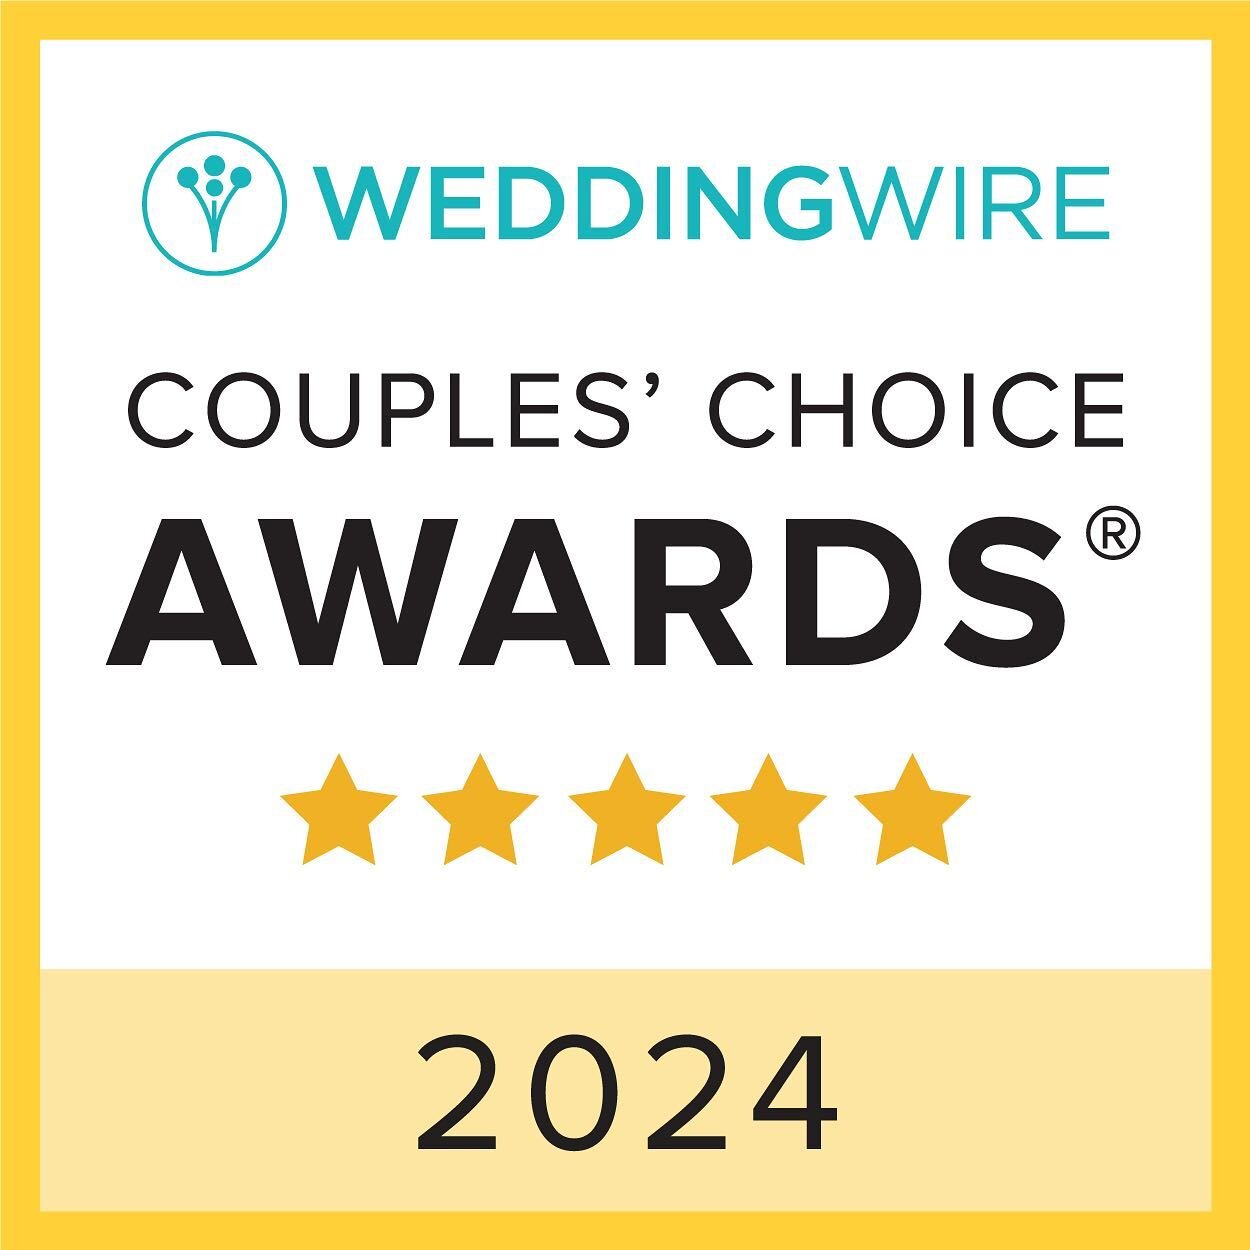 In the words of DJ Khaled&hellip; &ldquo;ANOTHER ONE!&rdquo;
⭐️⭐️⭐️⭐️⭐️
A bit late in sharing, but I am honored to receive the &ldquo;Couple&rsquo;s Choice&rdquo; award from @weddingwire for the FIFTH time! This award is only made possible because of